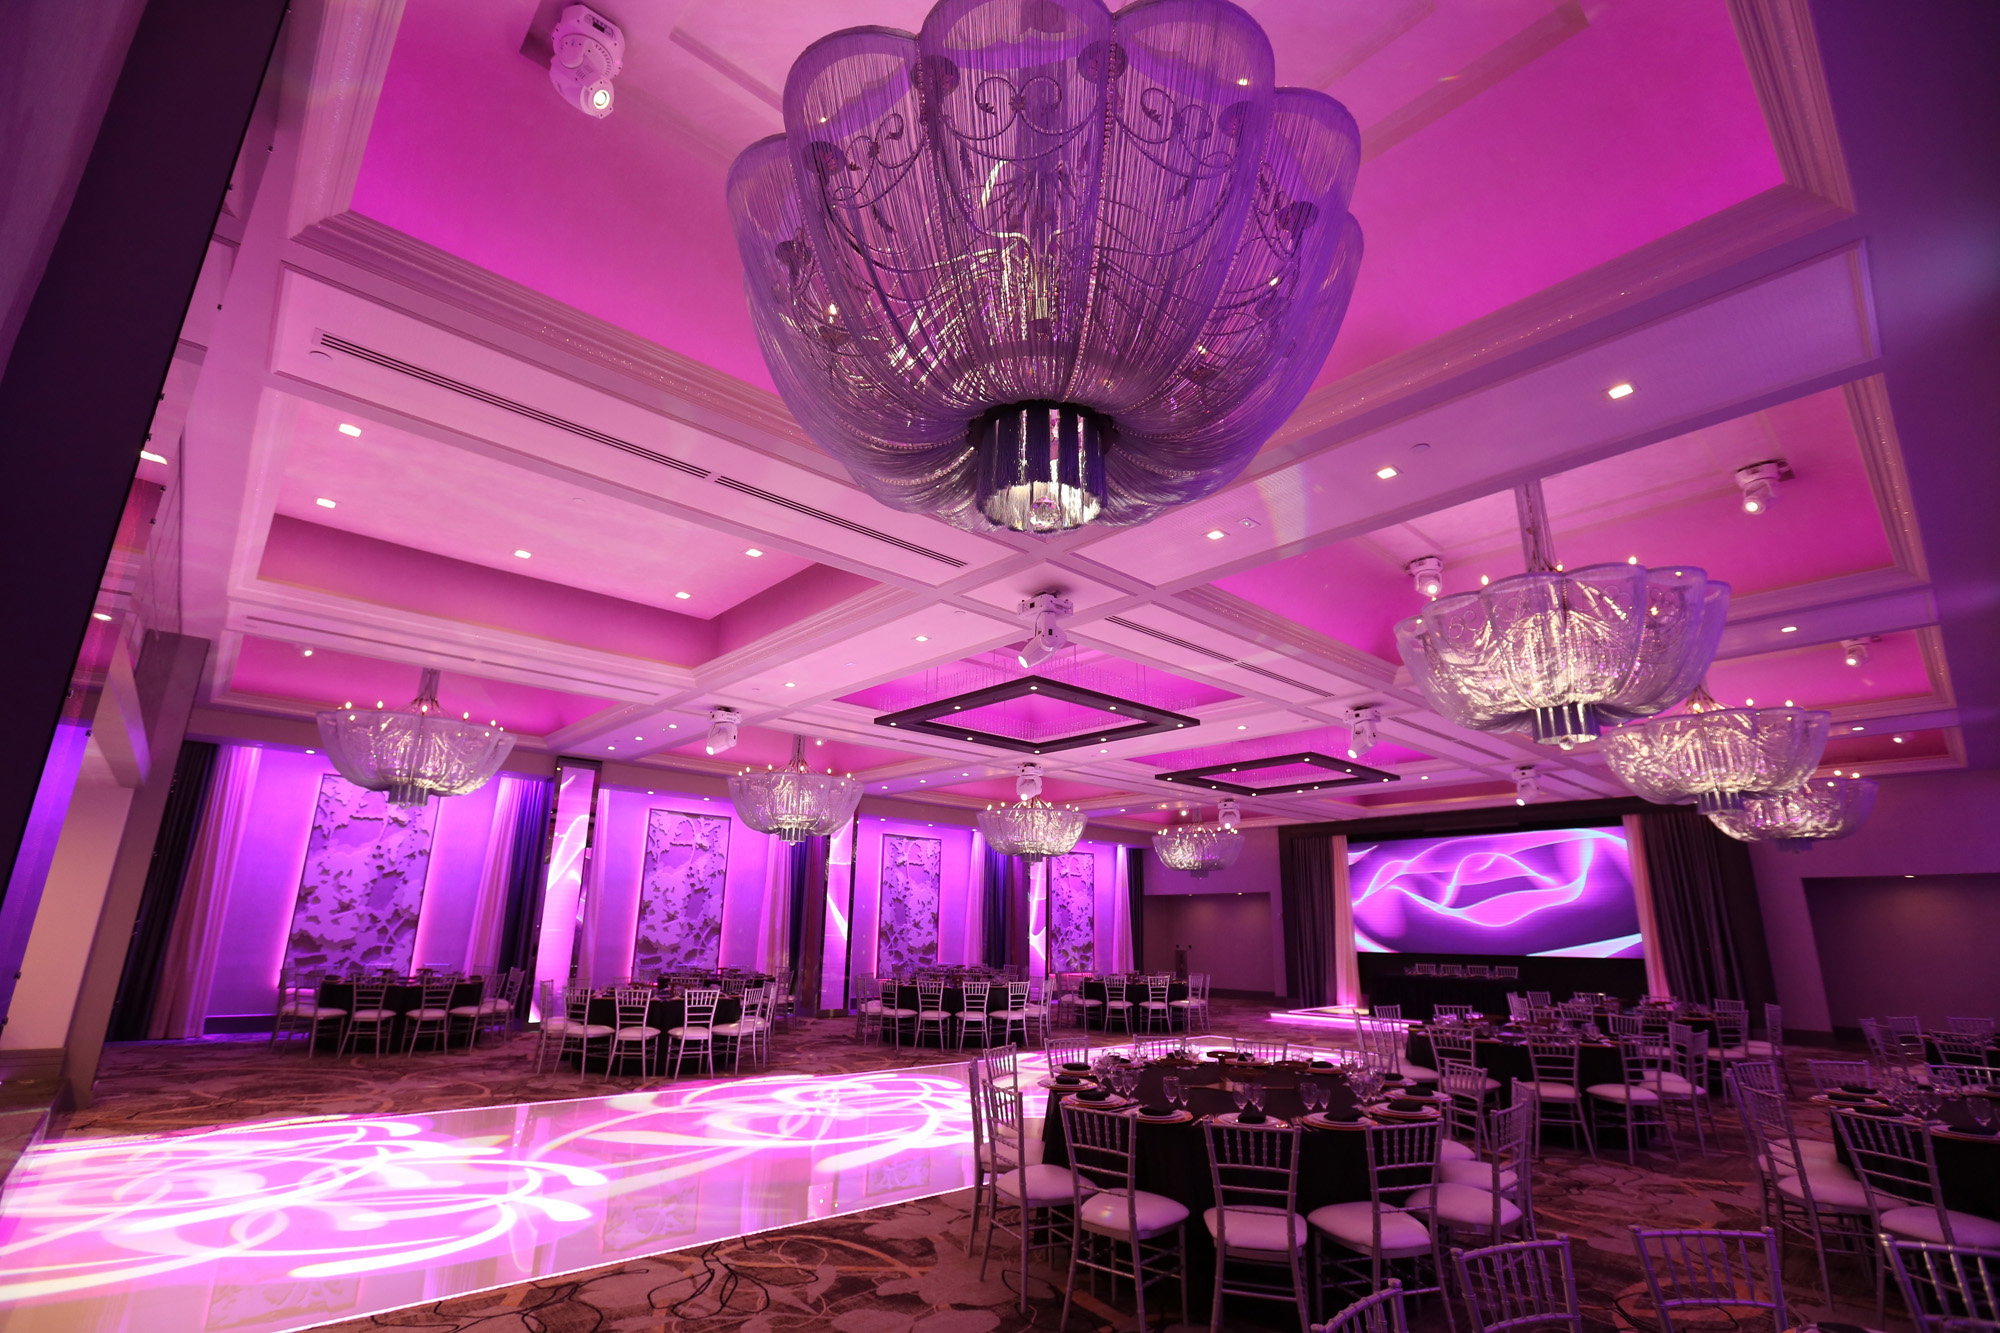 What Are The Important Things To Know About Event Lighting